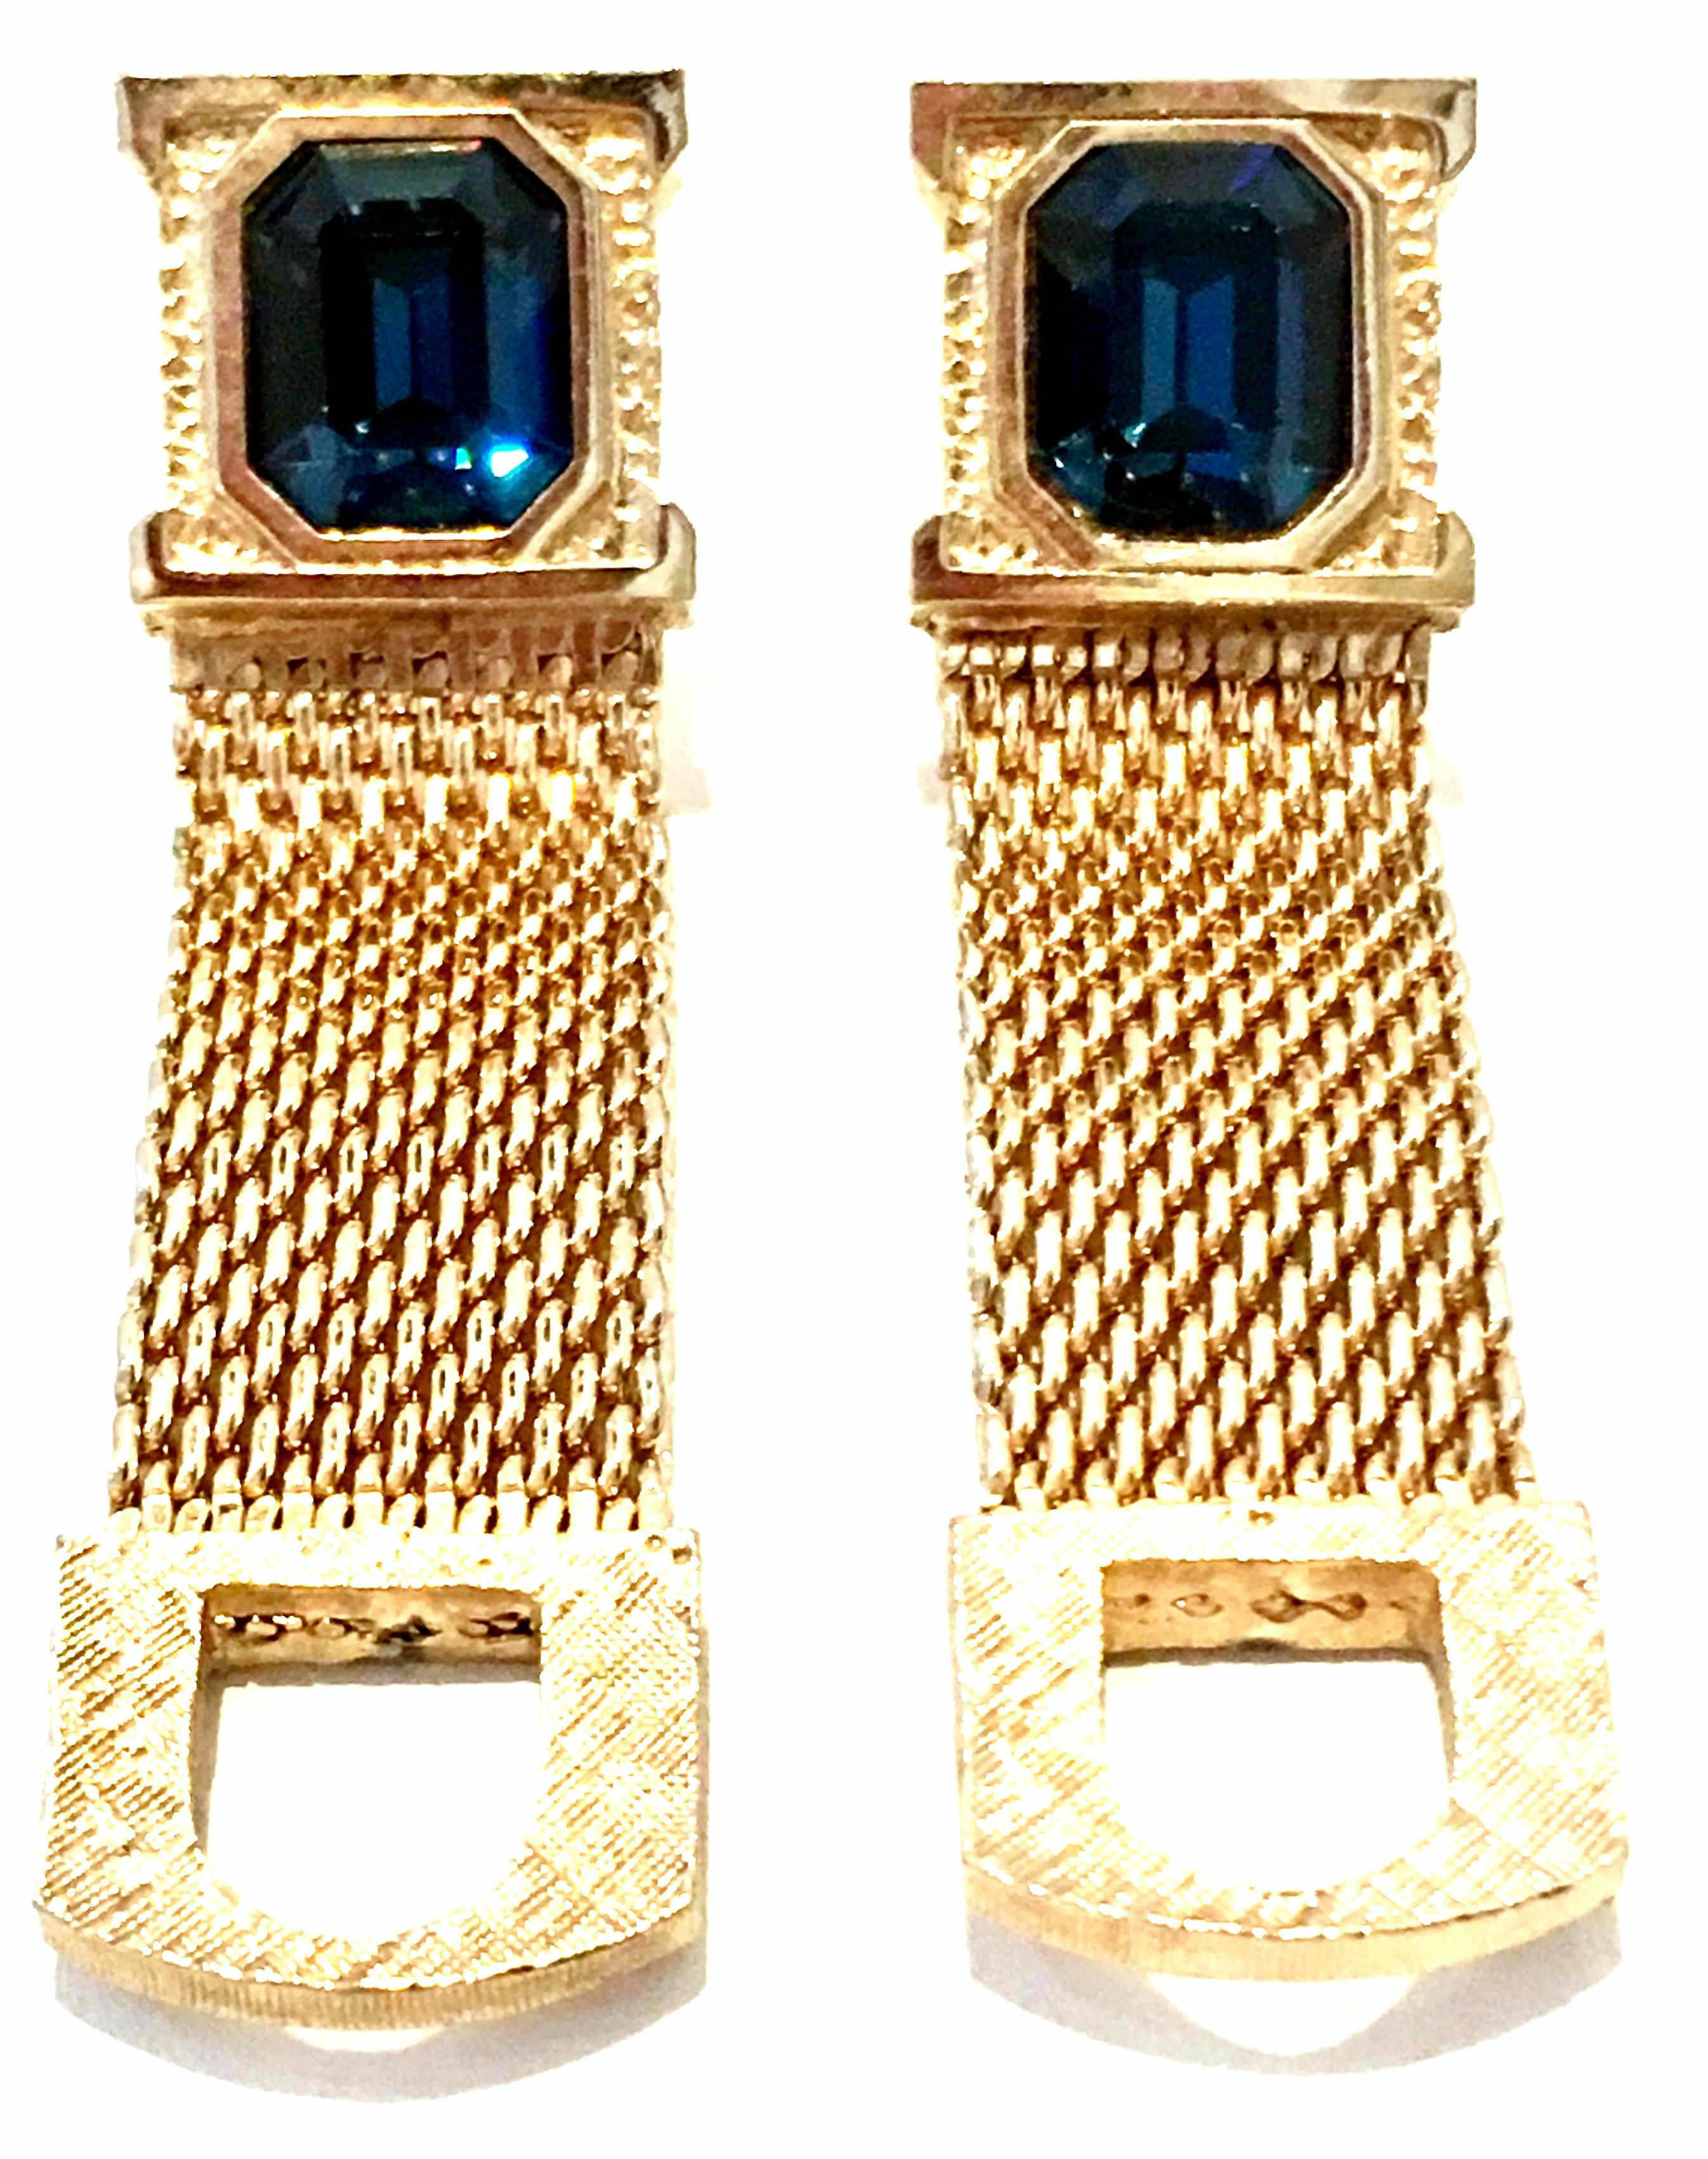 20th Century Gold Plate & Austrian Crystal Sapphire Blue Pair Of Cufflinks By Swank. Signed on the underside, SWANK.